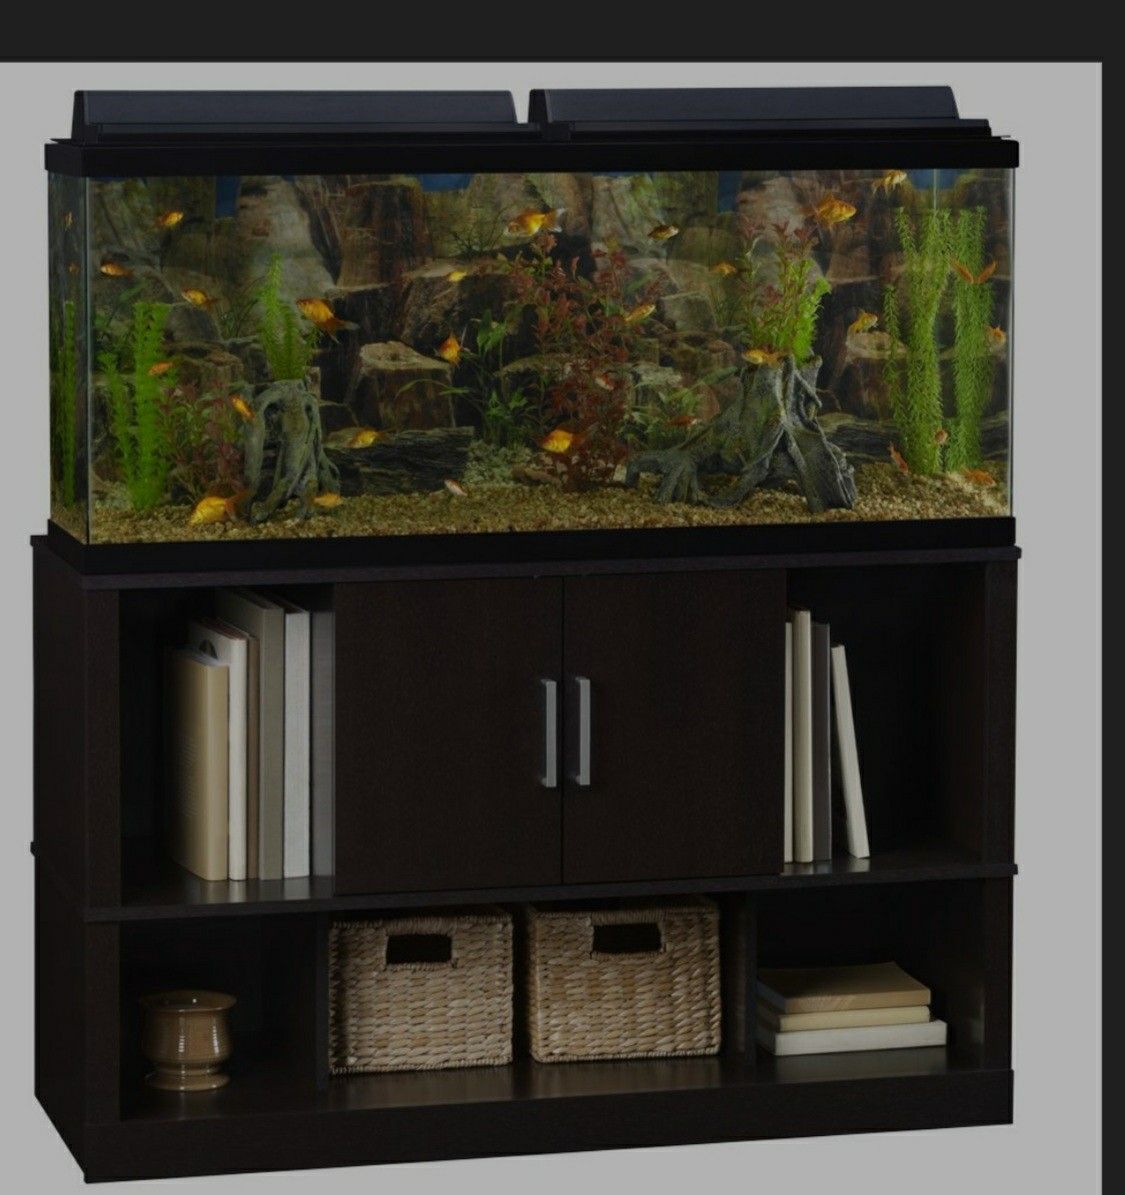 CABINET / STAND ONLY for Aquarium